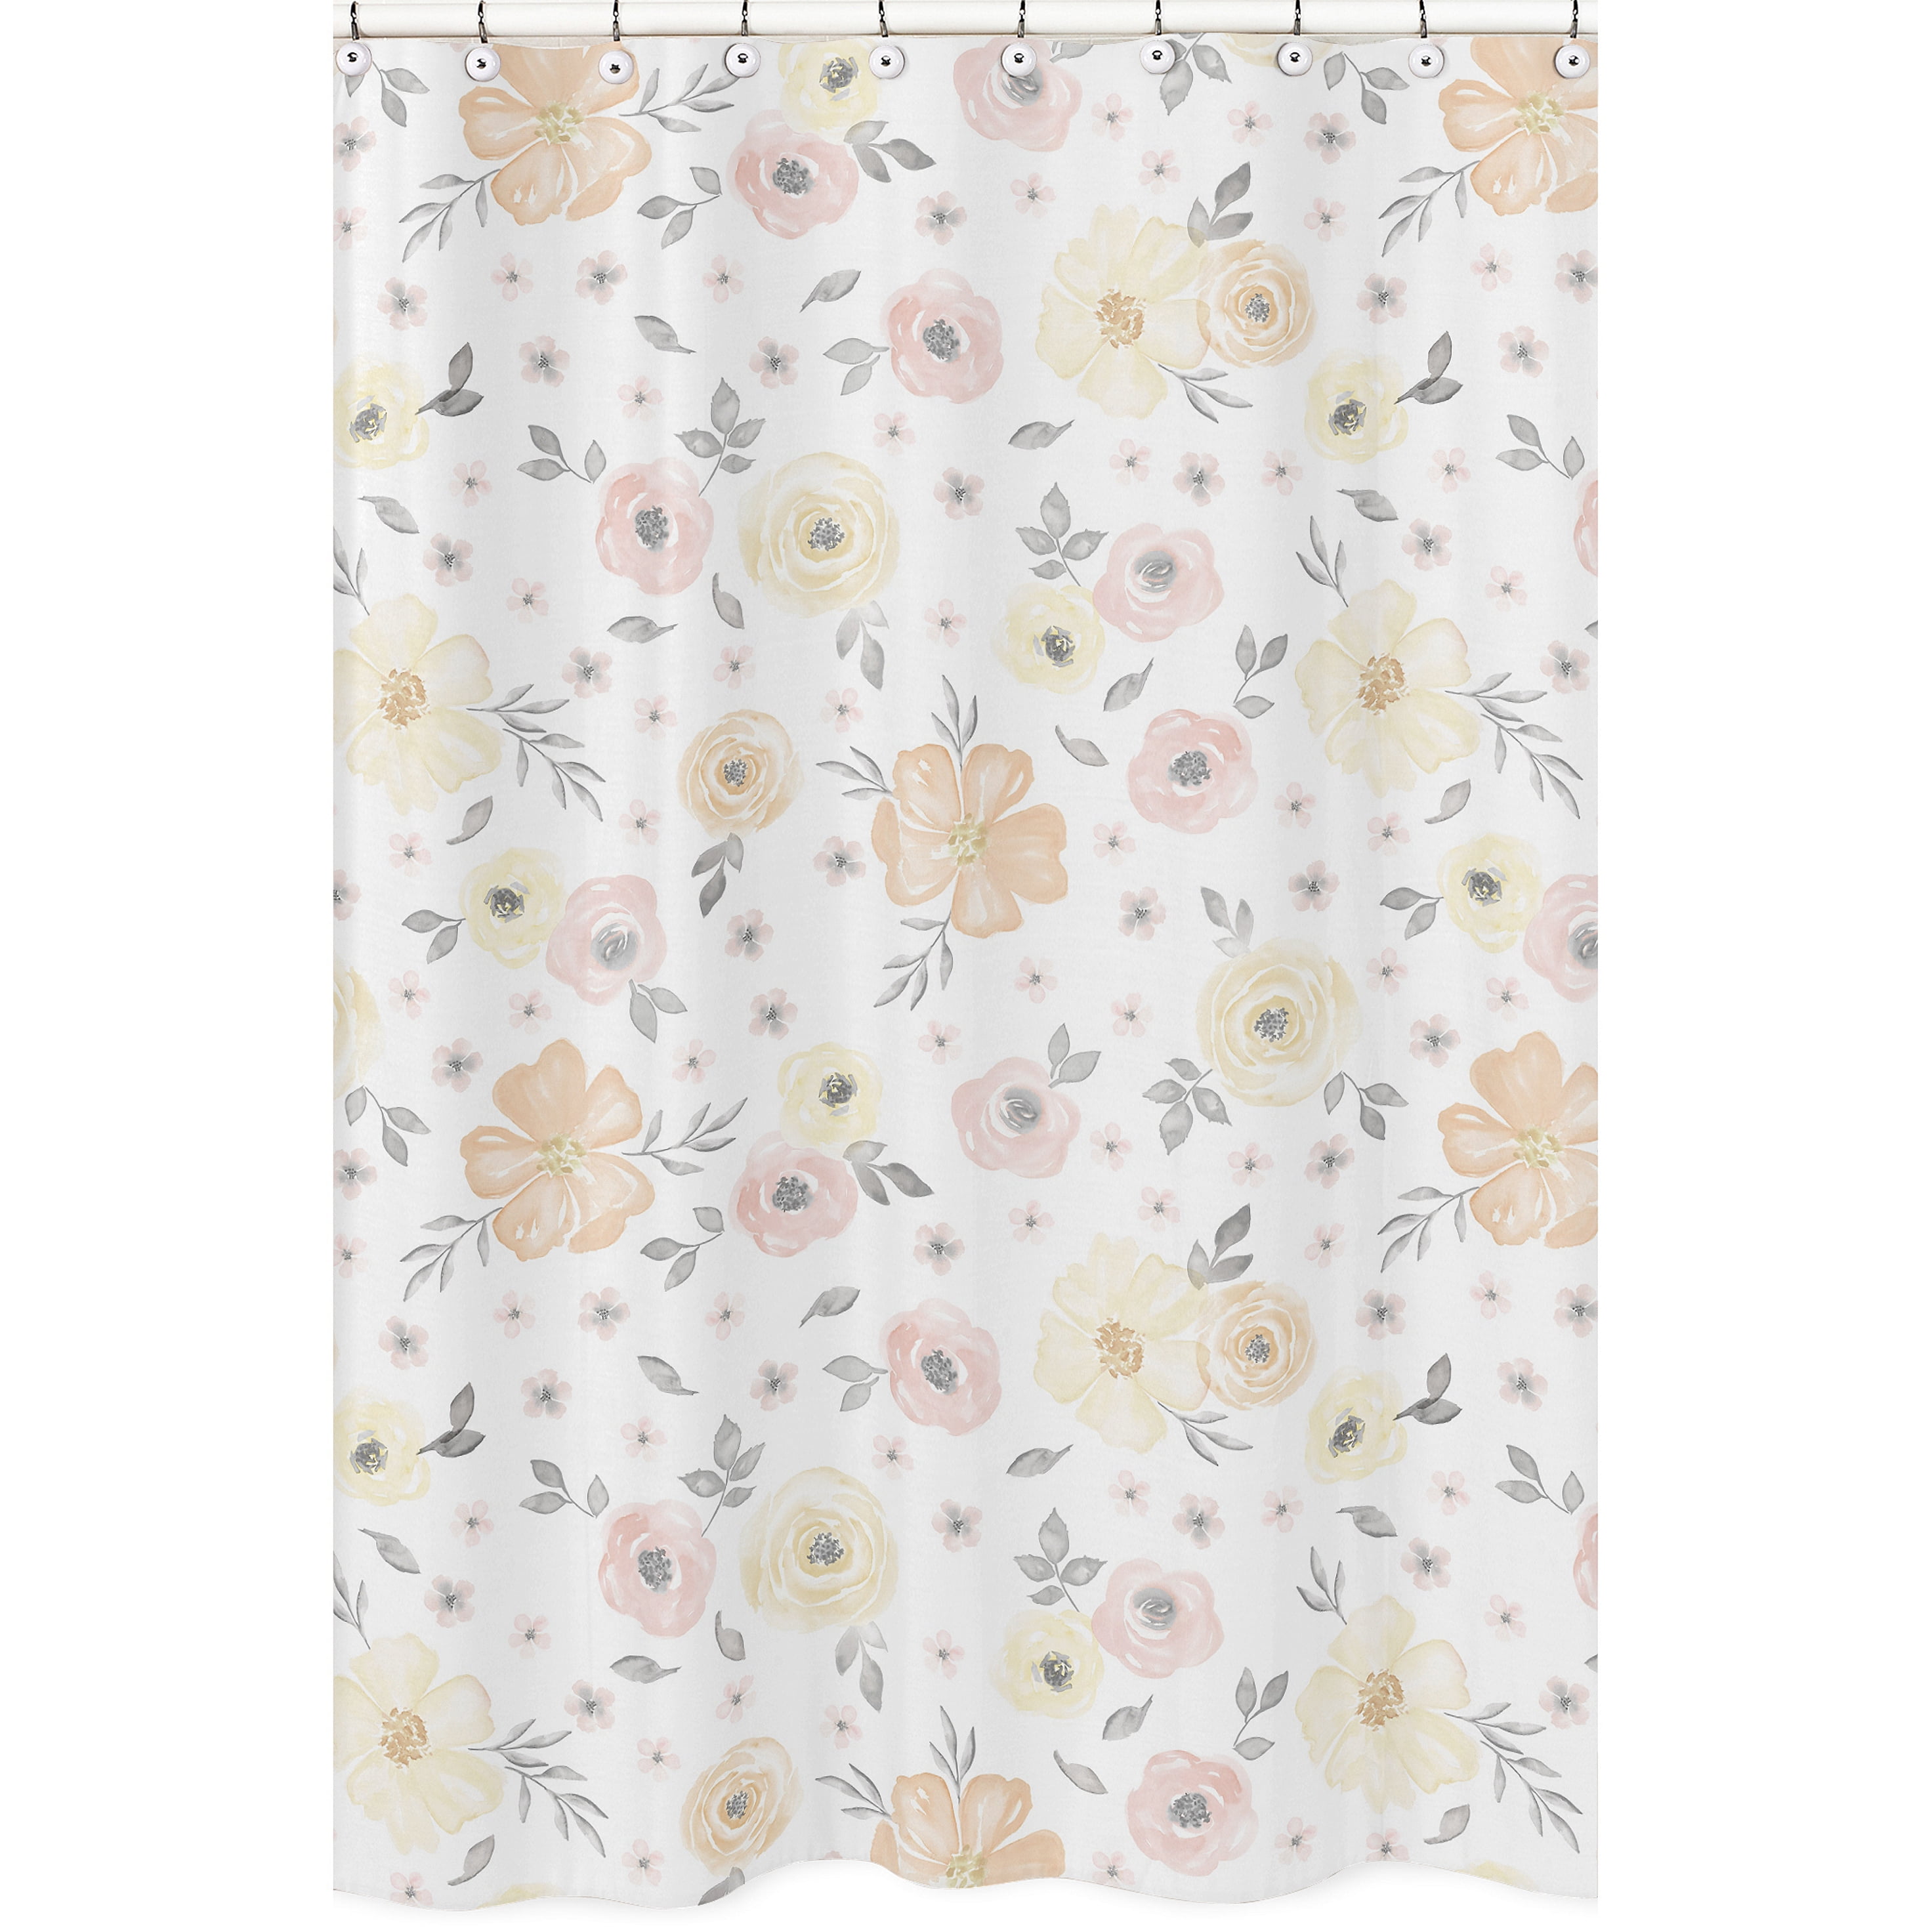 Sweet Jojo Designs Yellow and Pink Watercolor Floral Bathroom Fabric ...